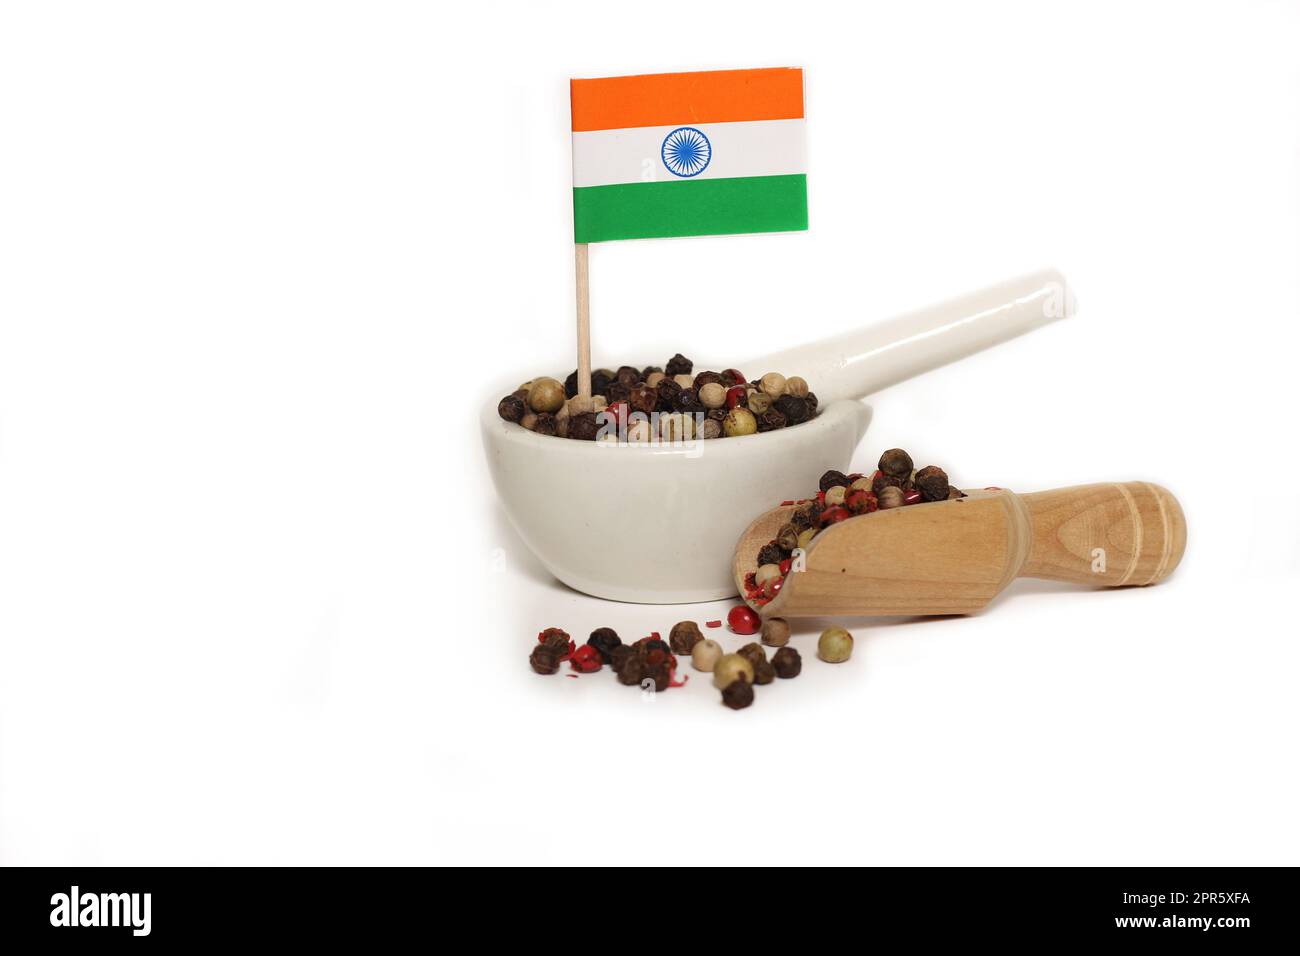 Mortar and Pestle With Mixed Peppercorns and Flag of India Stock Photo